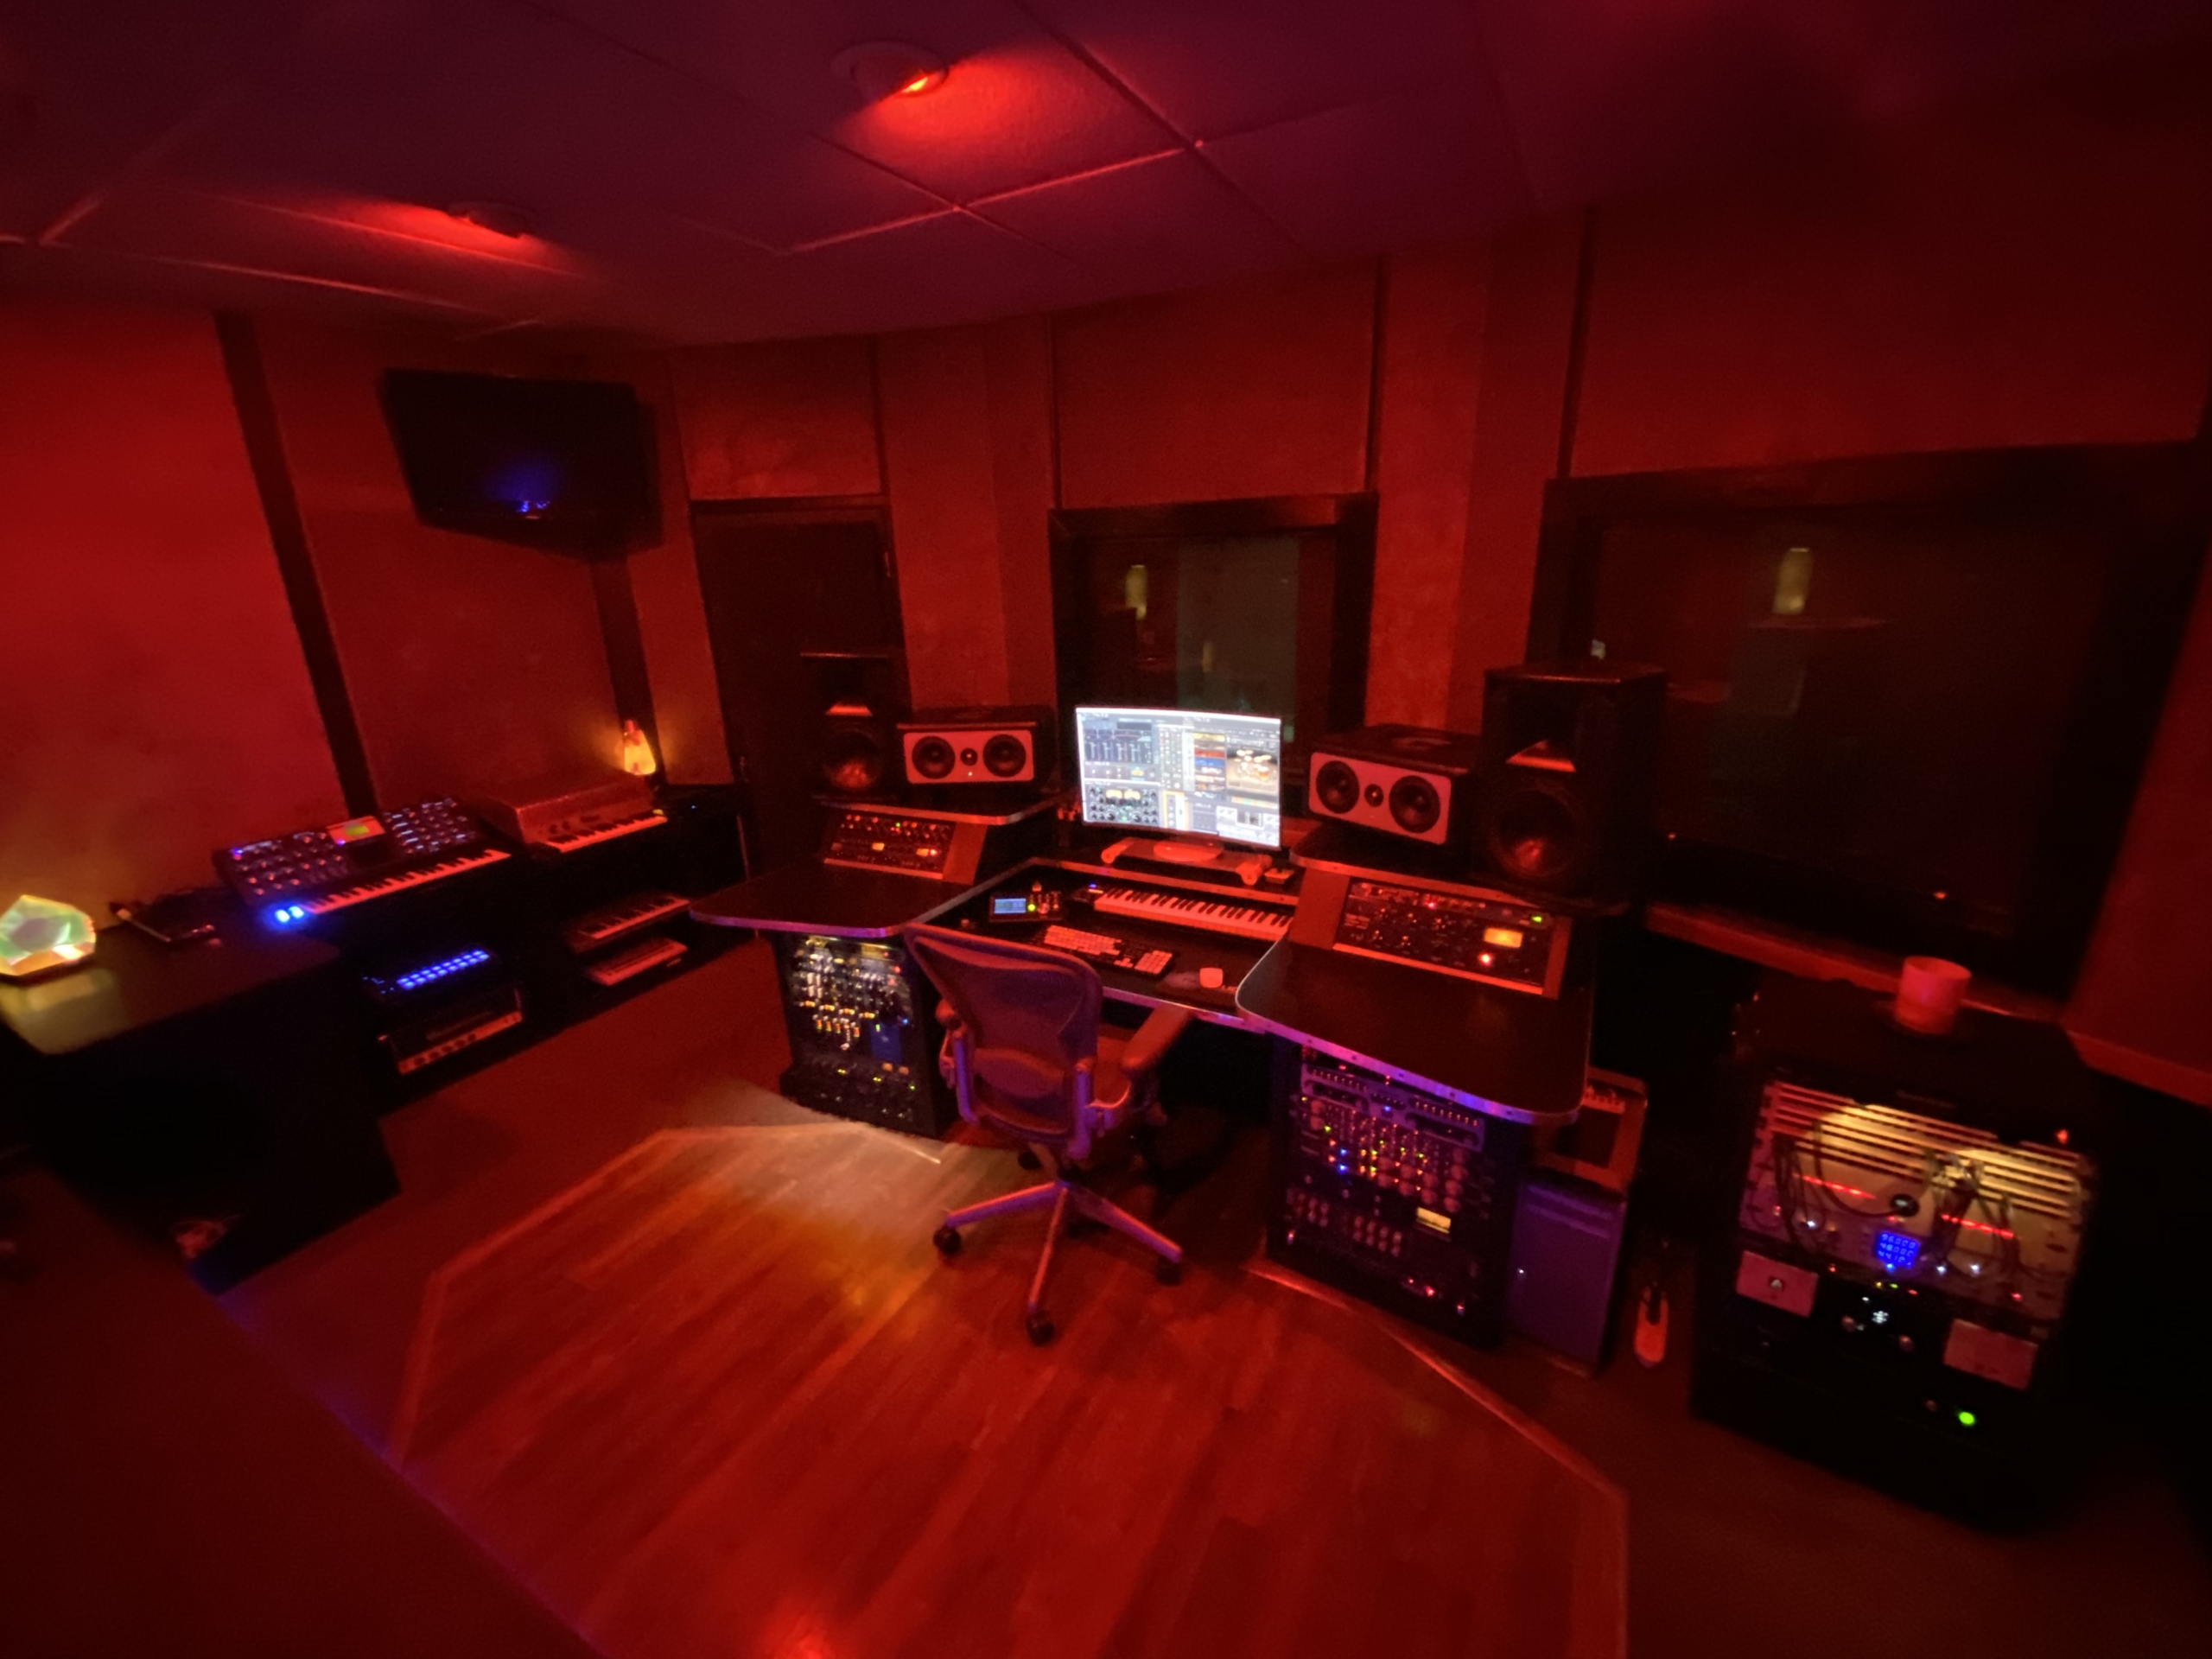 The recroding studios in atlanta are waiting for you to catapult your career